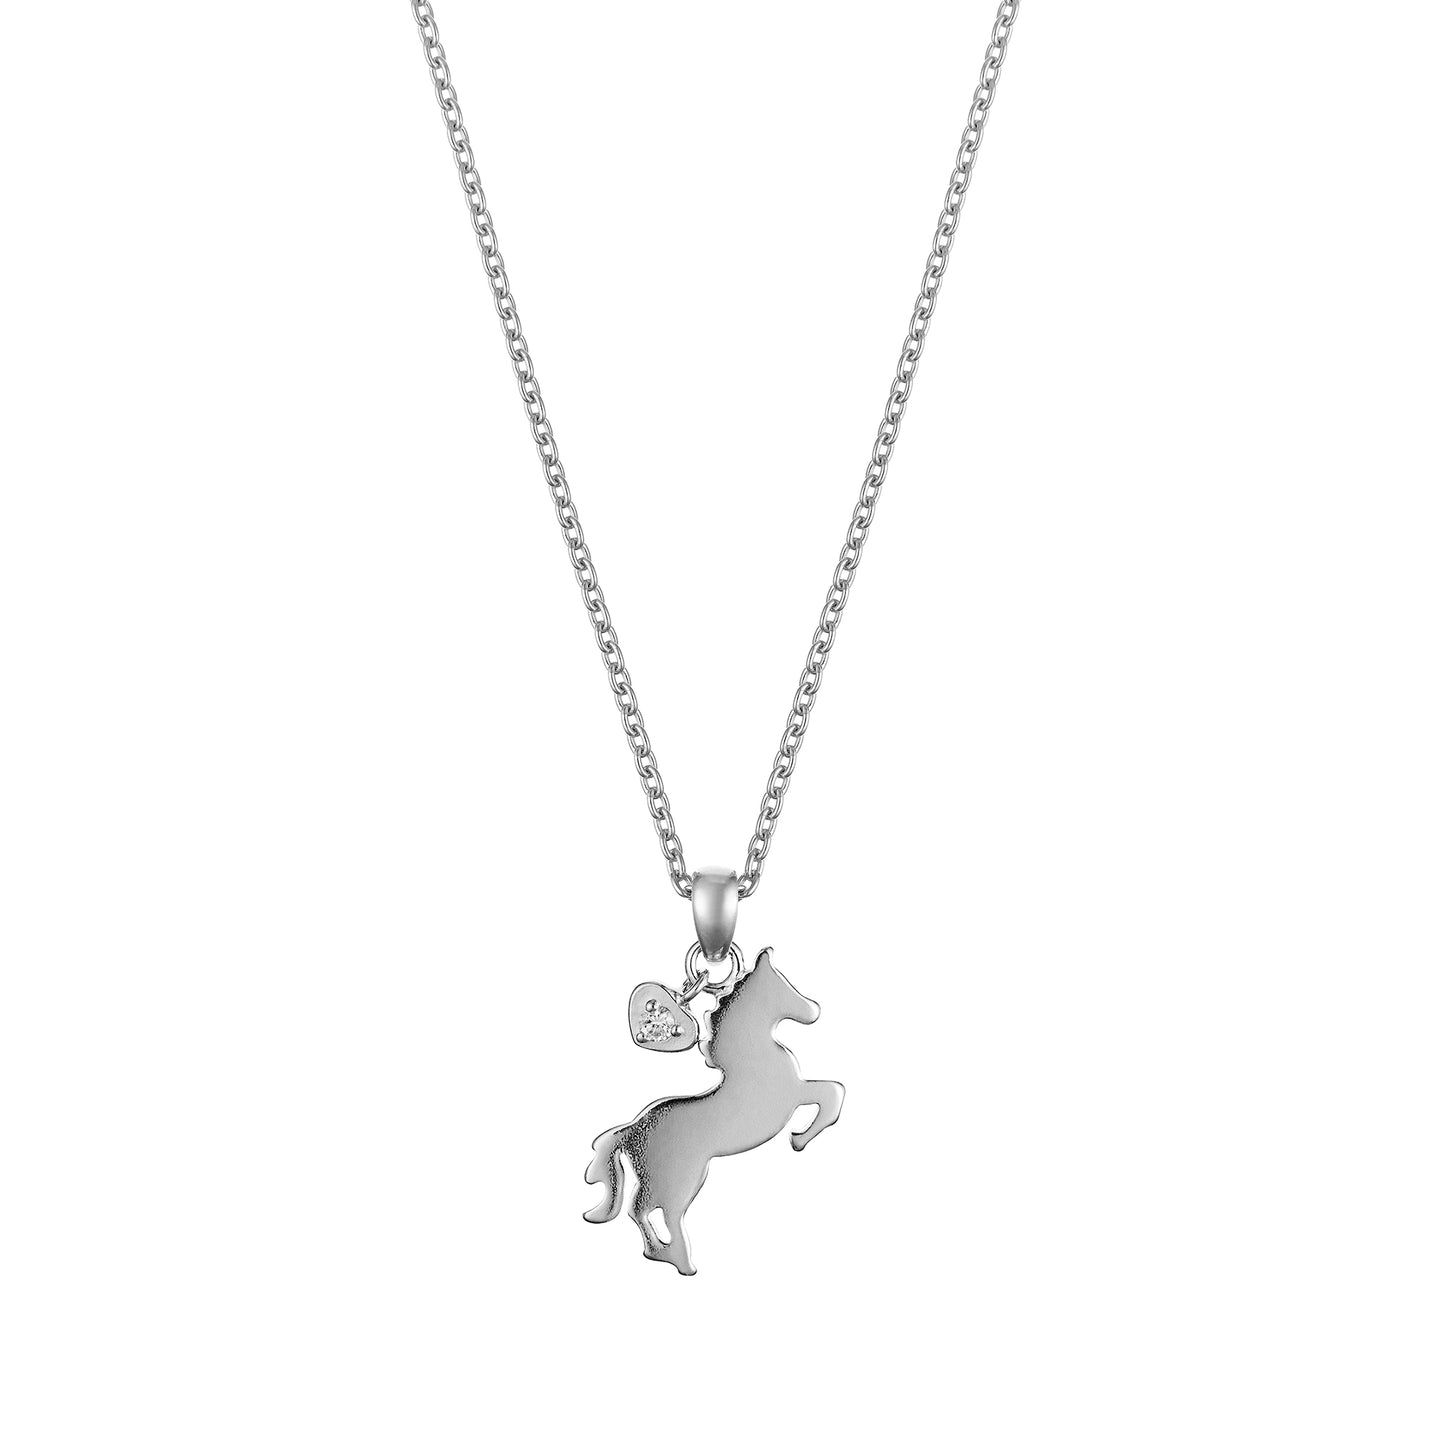 Children's Sterling Silver Horse Pendant with Sapphire Charm on an Extendable Chain Necklace